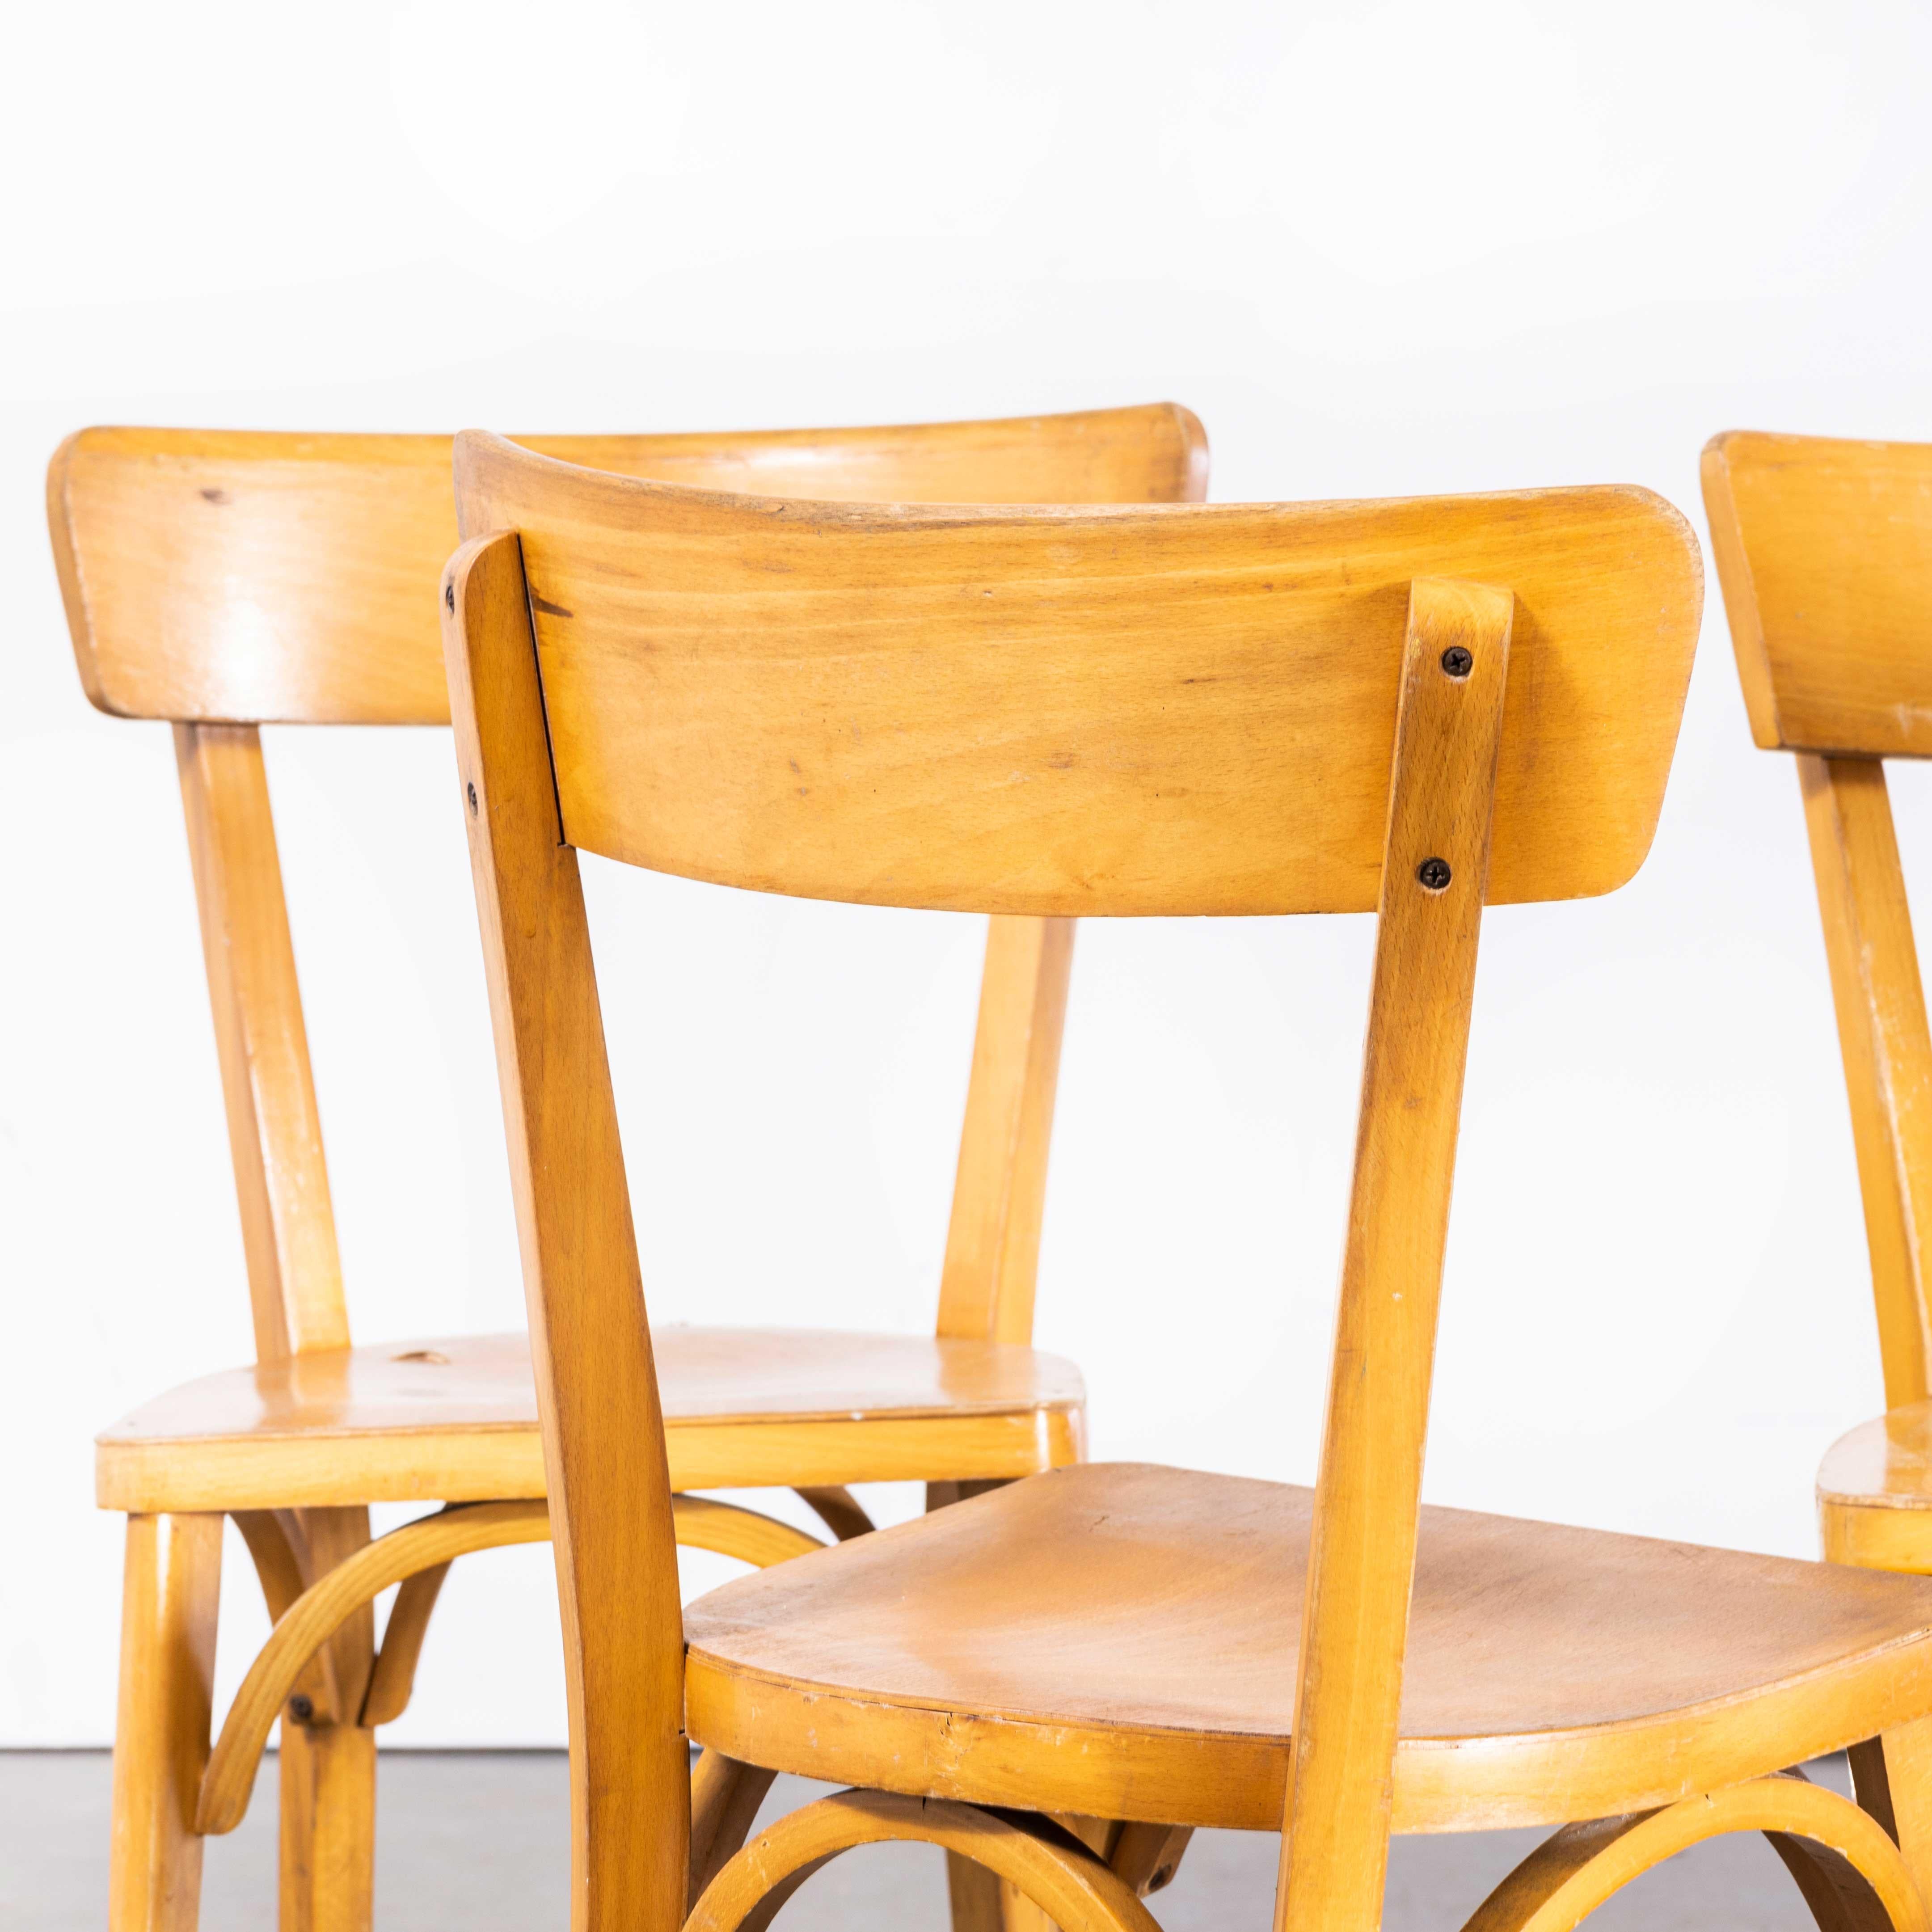 1950s French Baumann Blonde Beech Bentwood Dining Chairs – Set Of Six
1950s French Baumann Blonde Beech Bentwood Dining Chairs – Set Of Six. Baumann is a slightly off the radar French producer just starting to gain traction in the market. Baumann